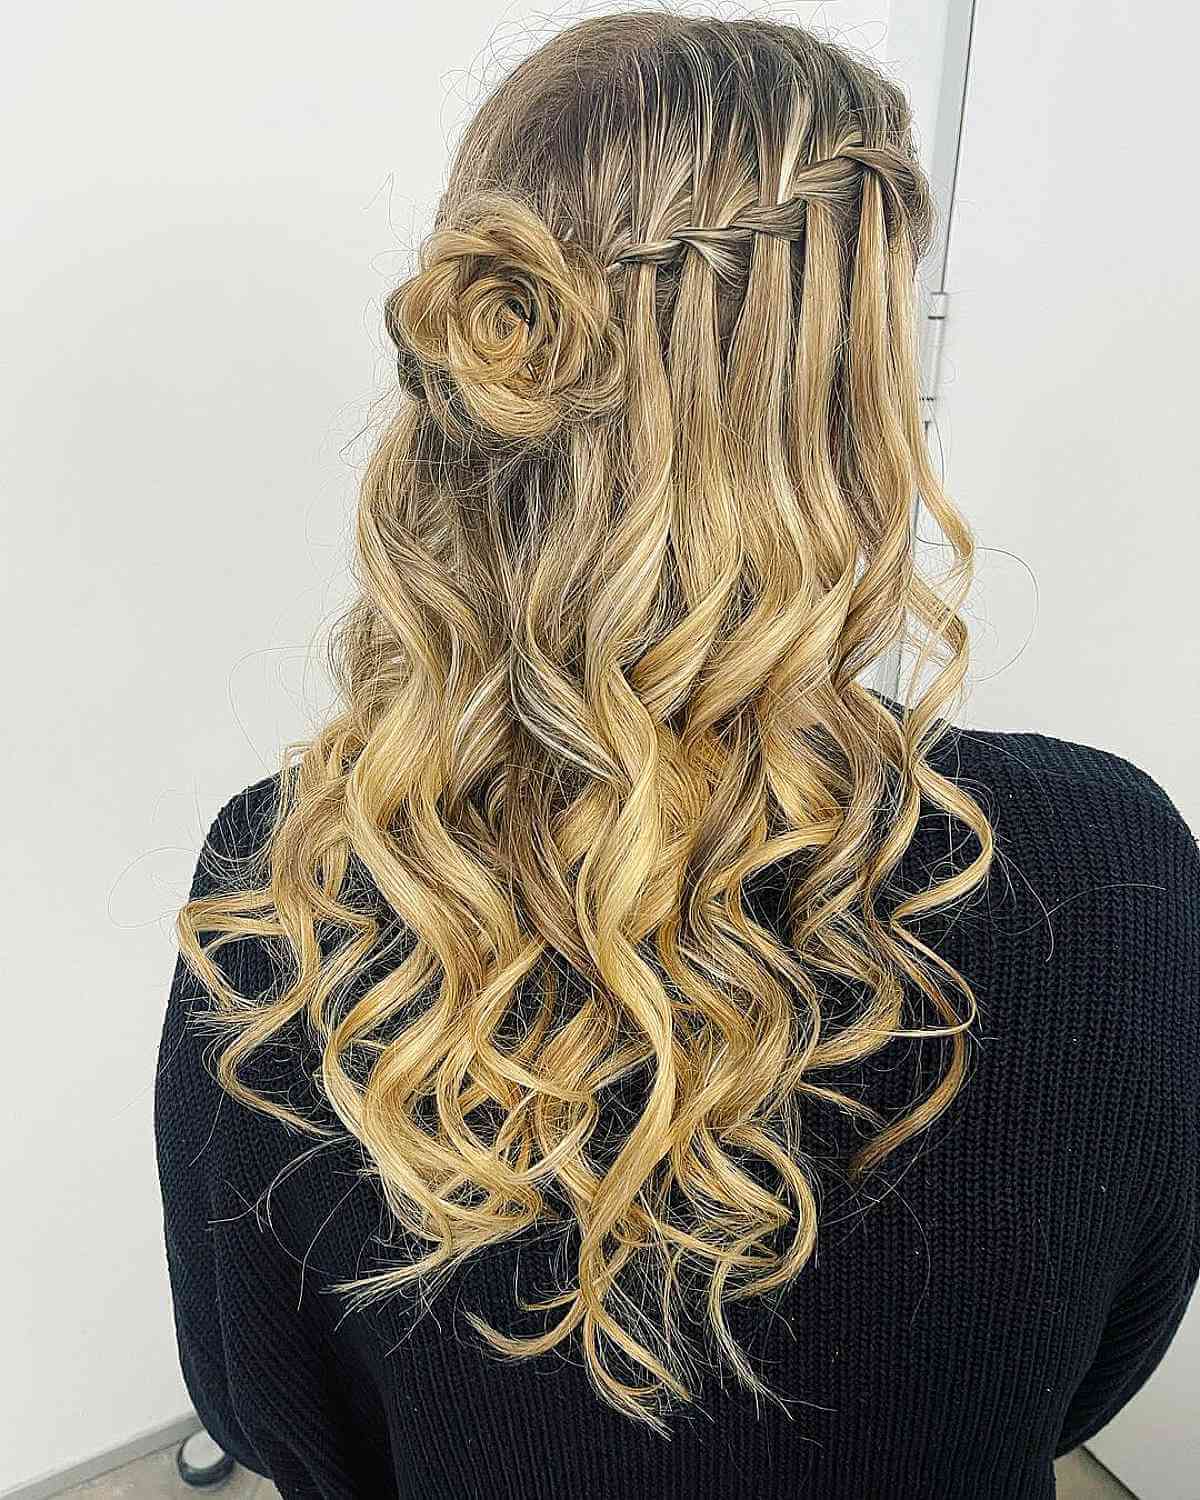 Prom Hairstyles & Ideas